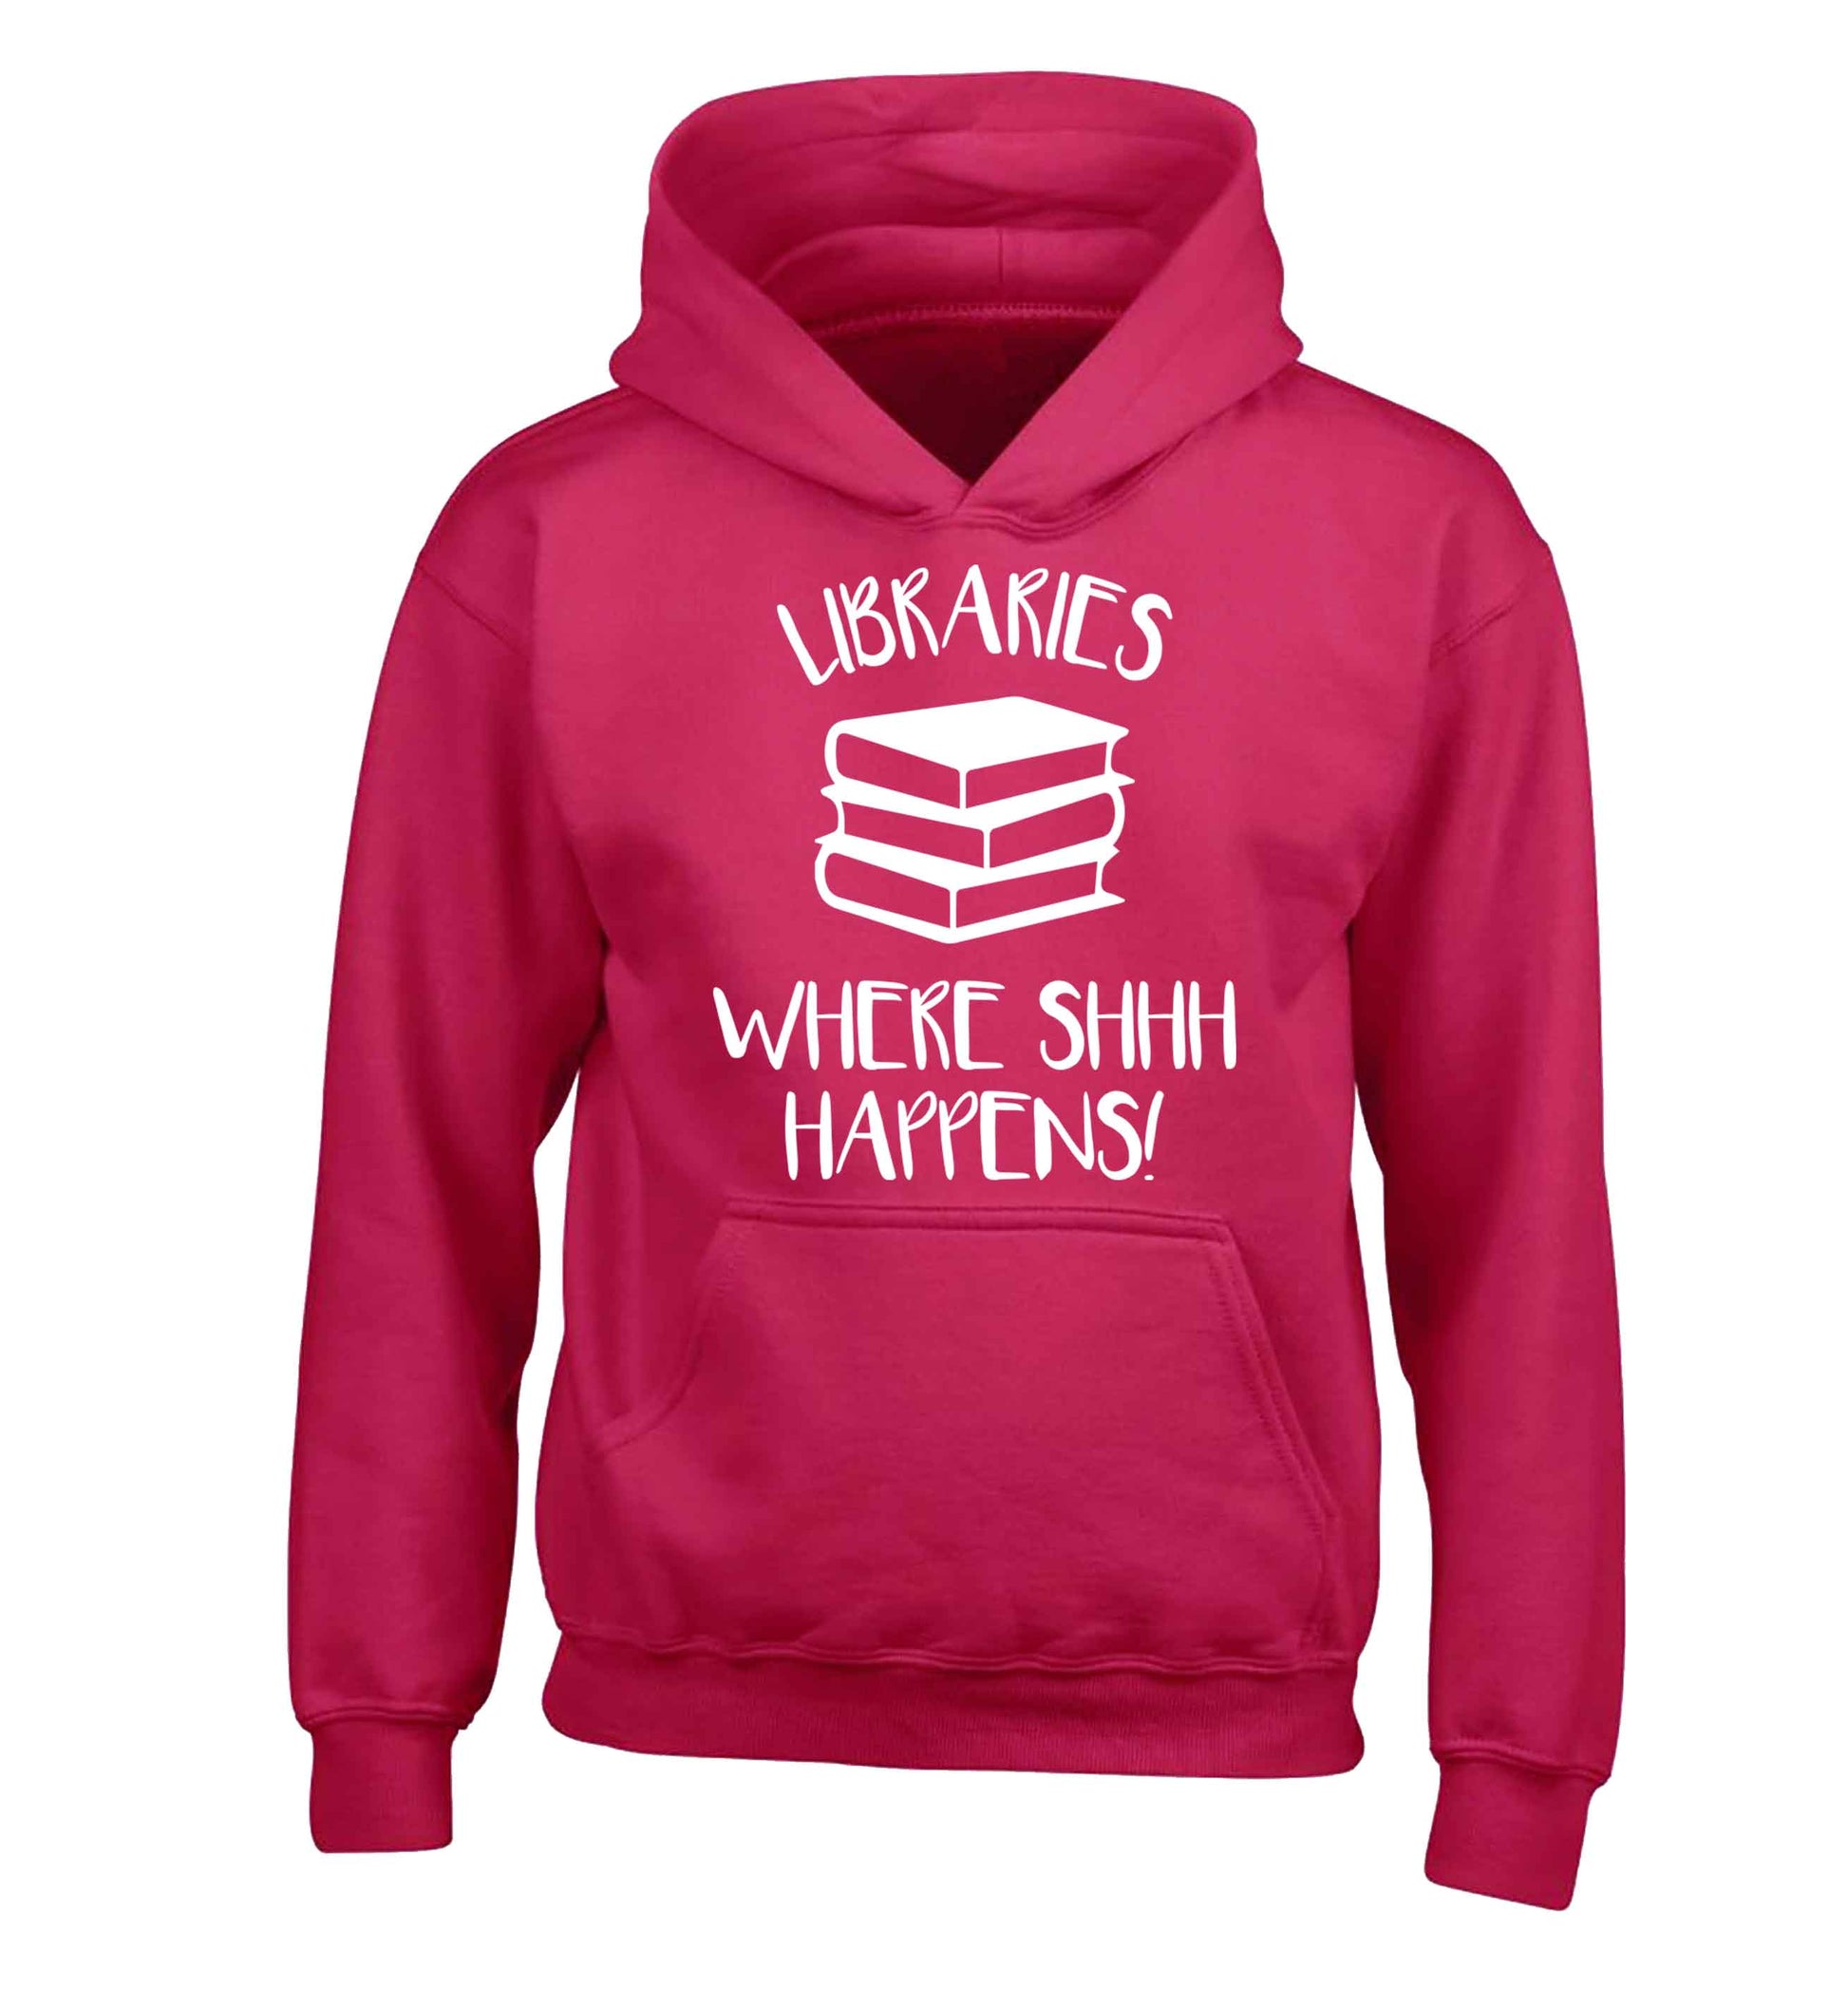 Libraries where shh happens! children's pink hoodie 12-13 Years